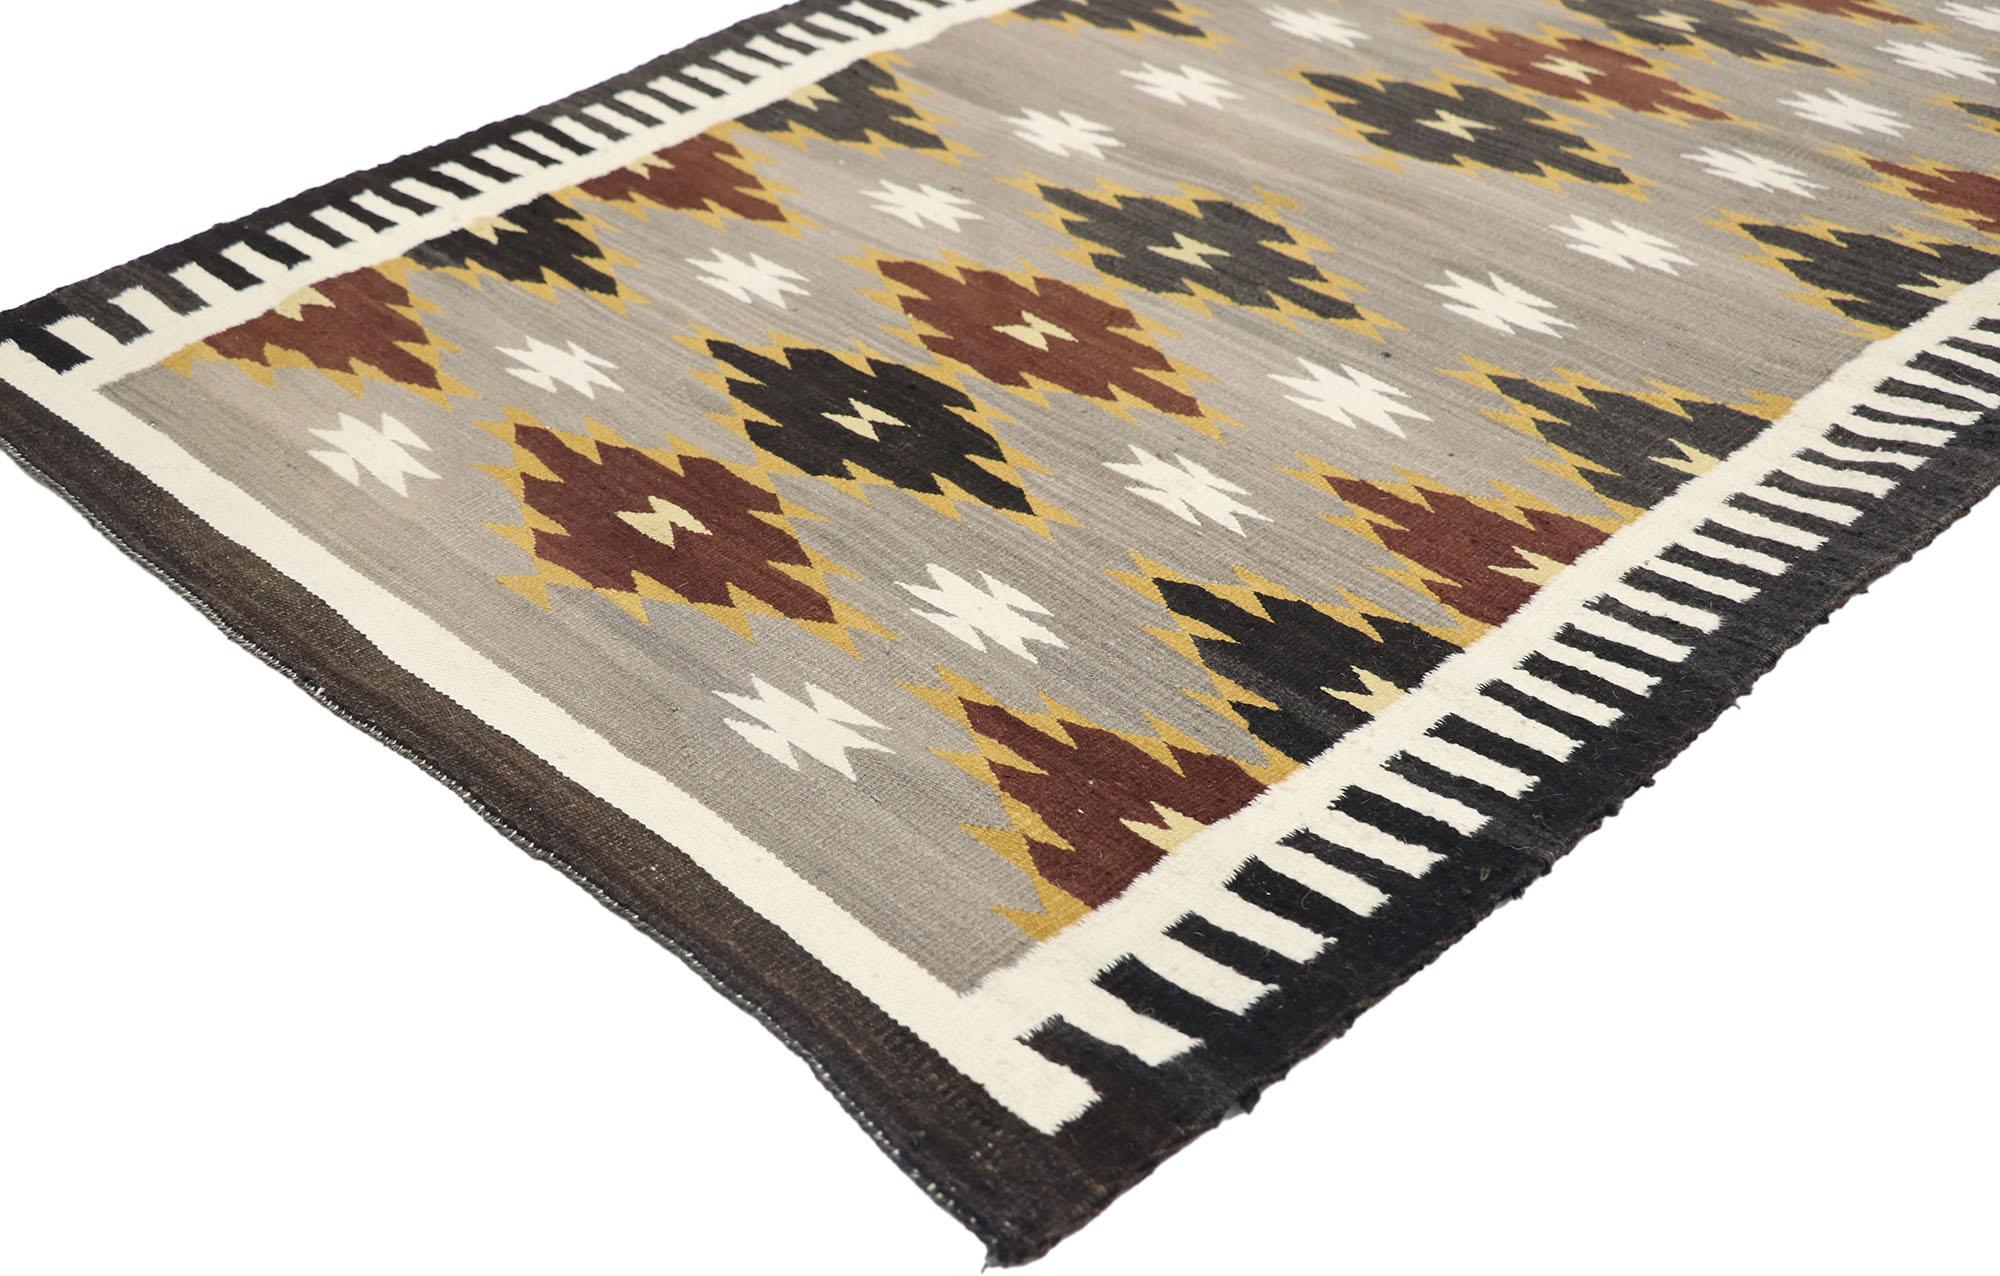 77869, vintage Navajo Kilim rug with Two Grey Hills style. With its bold expressive design, incredible detail and texture, this hand-woven wool vintage Navajo Kilim rug is a captivating vision of woven beauty highlighting Native American style with